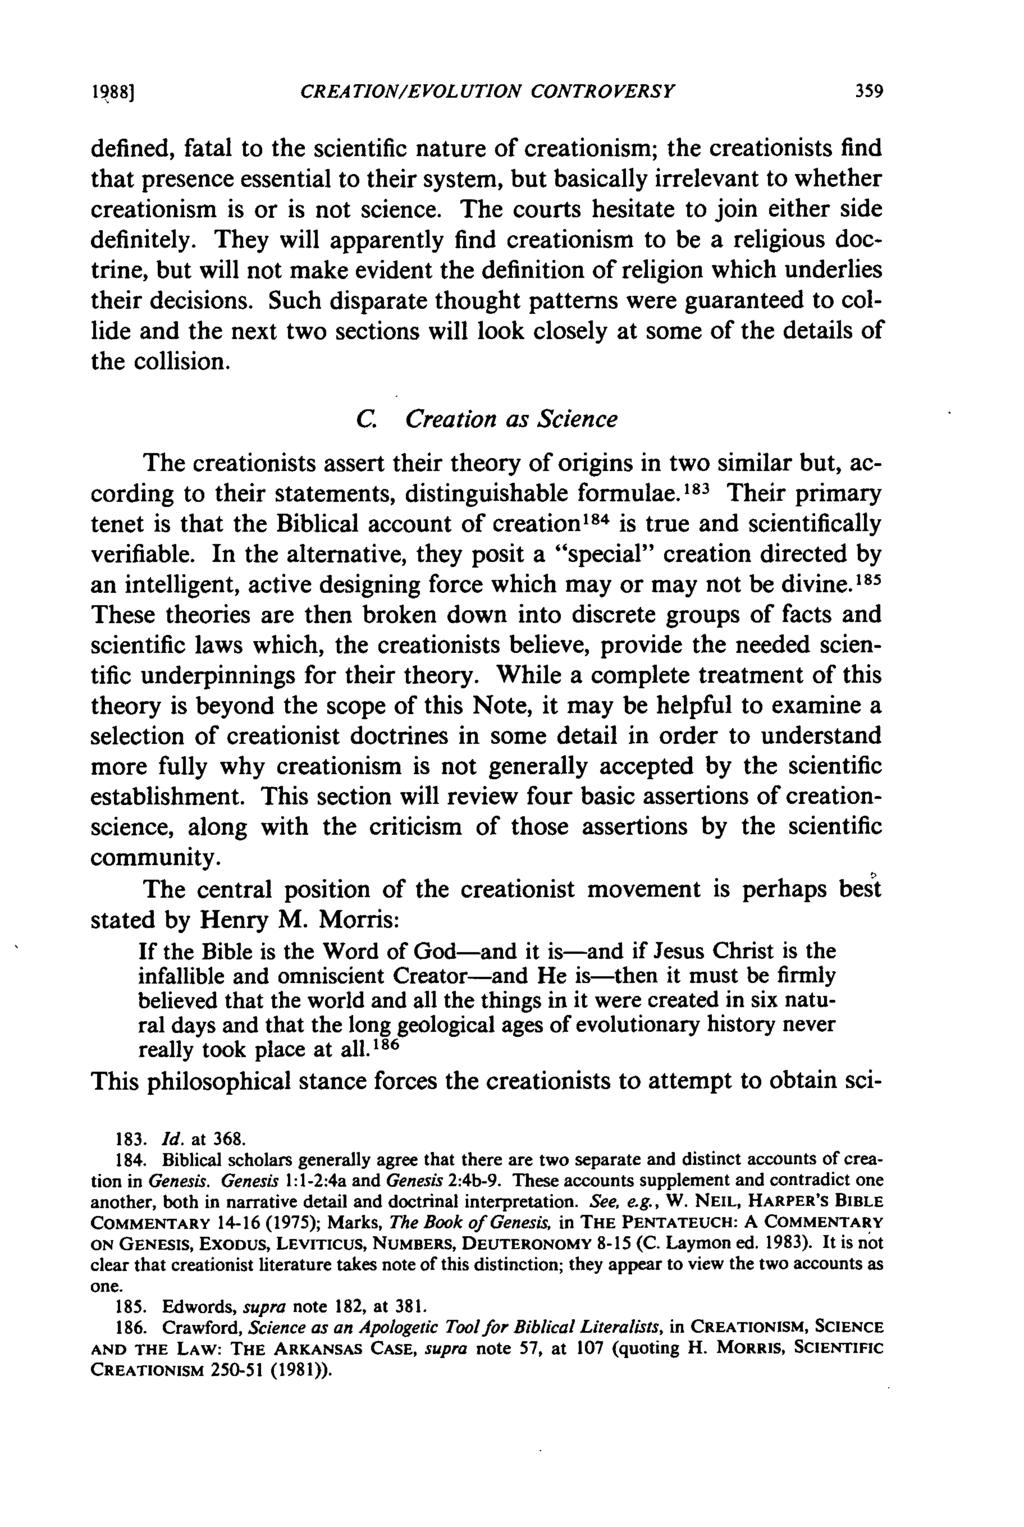 1988) CREATION/EVOLUTION CONTROVERSY defined, fatal to the scientific nature of creationism; the creationists find that presence essential to their system, but basically irrelevant to whether